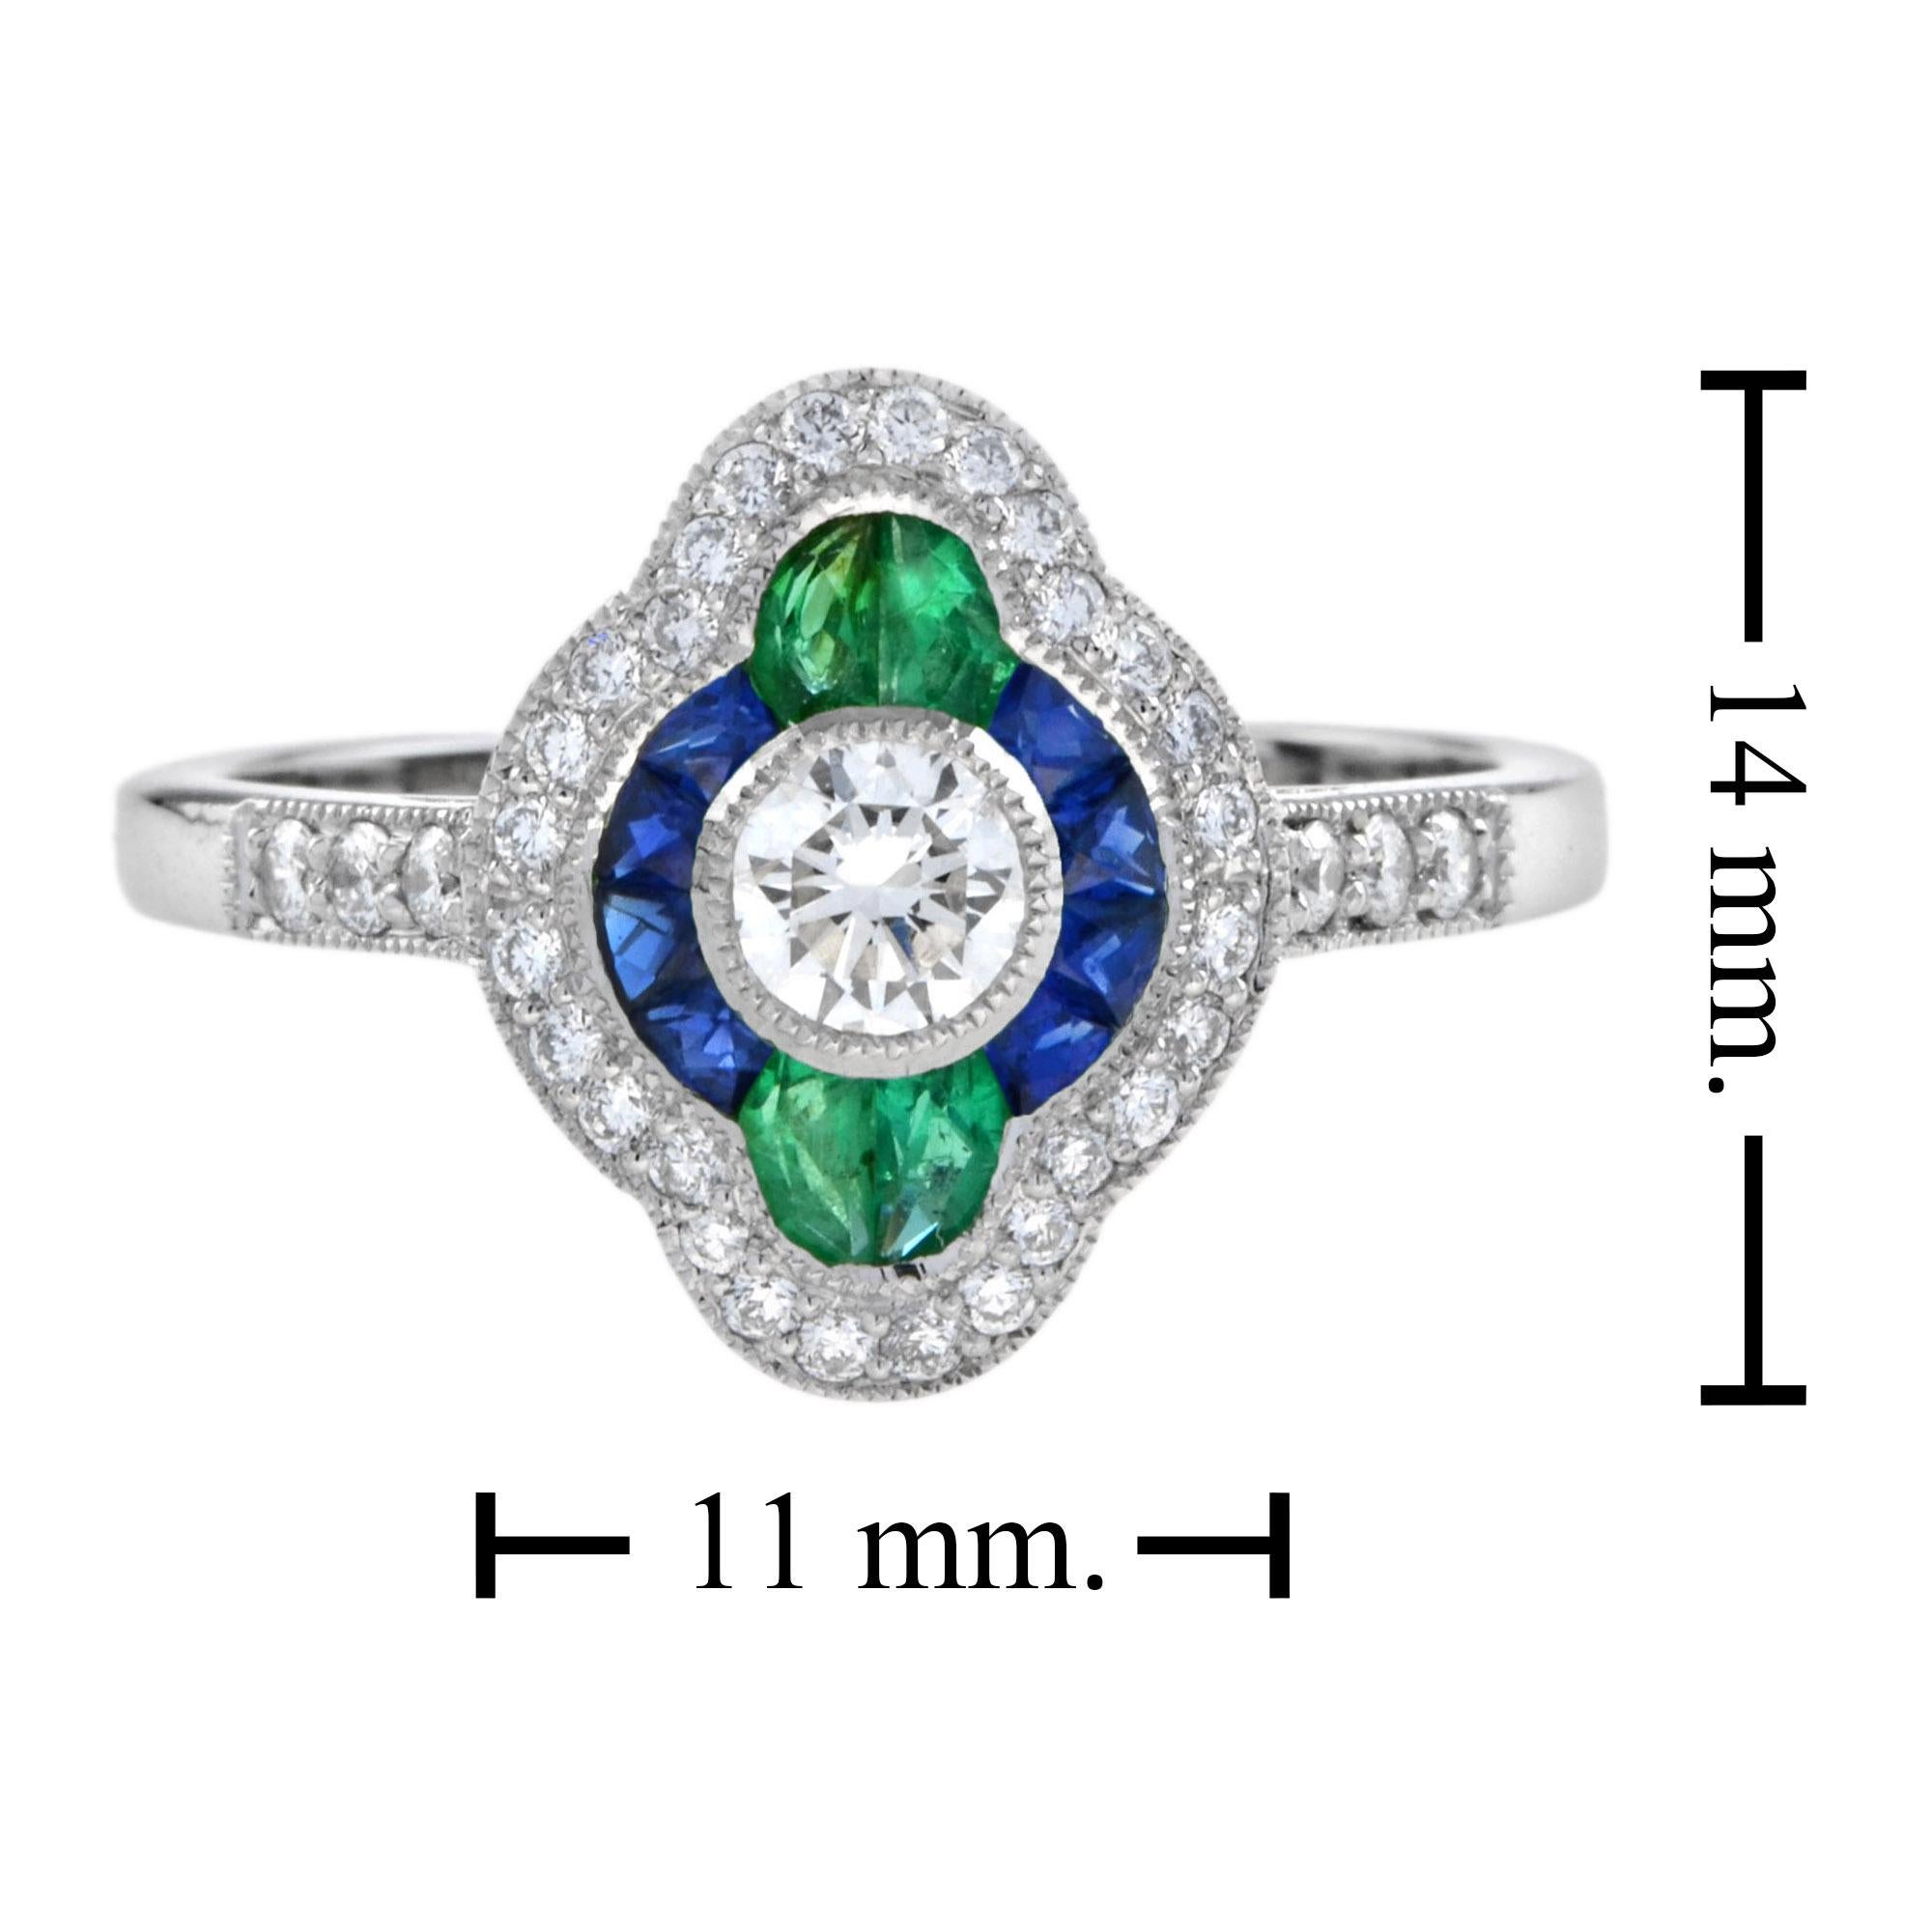 For Sale:  Diamond Sapphire Emerald Art Deco Style Engagement Ring in 18k White Gold 7